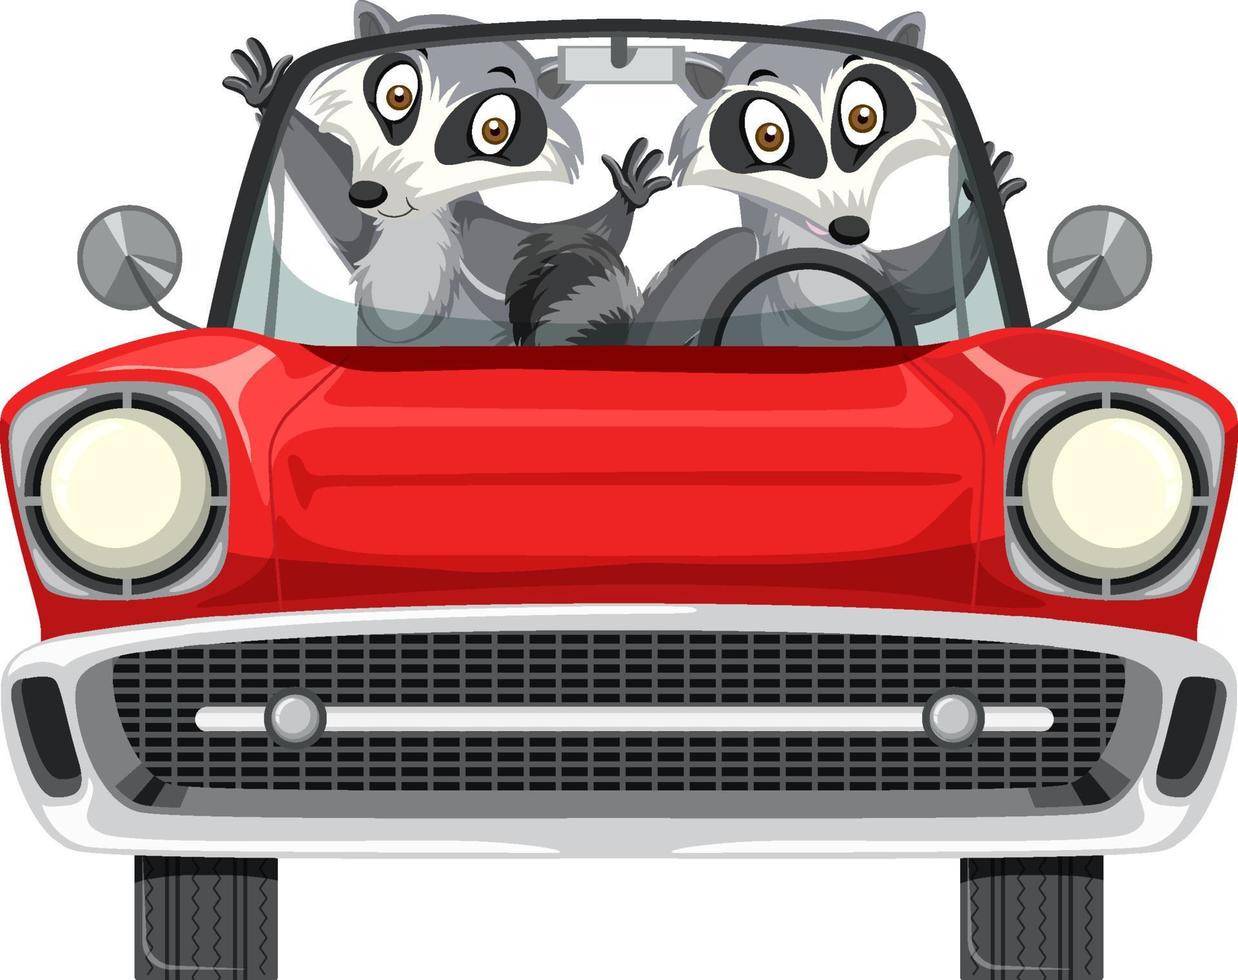 Raccoon in classic red car on white background vector